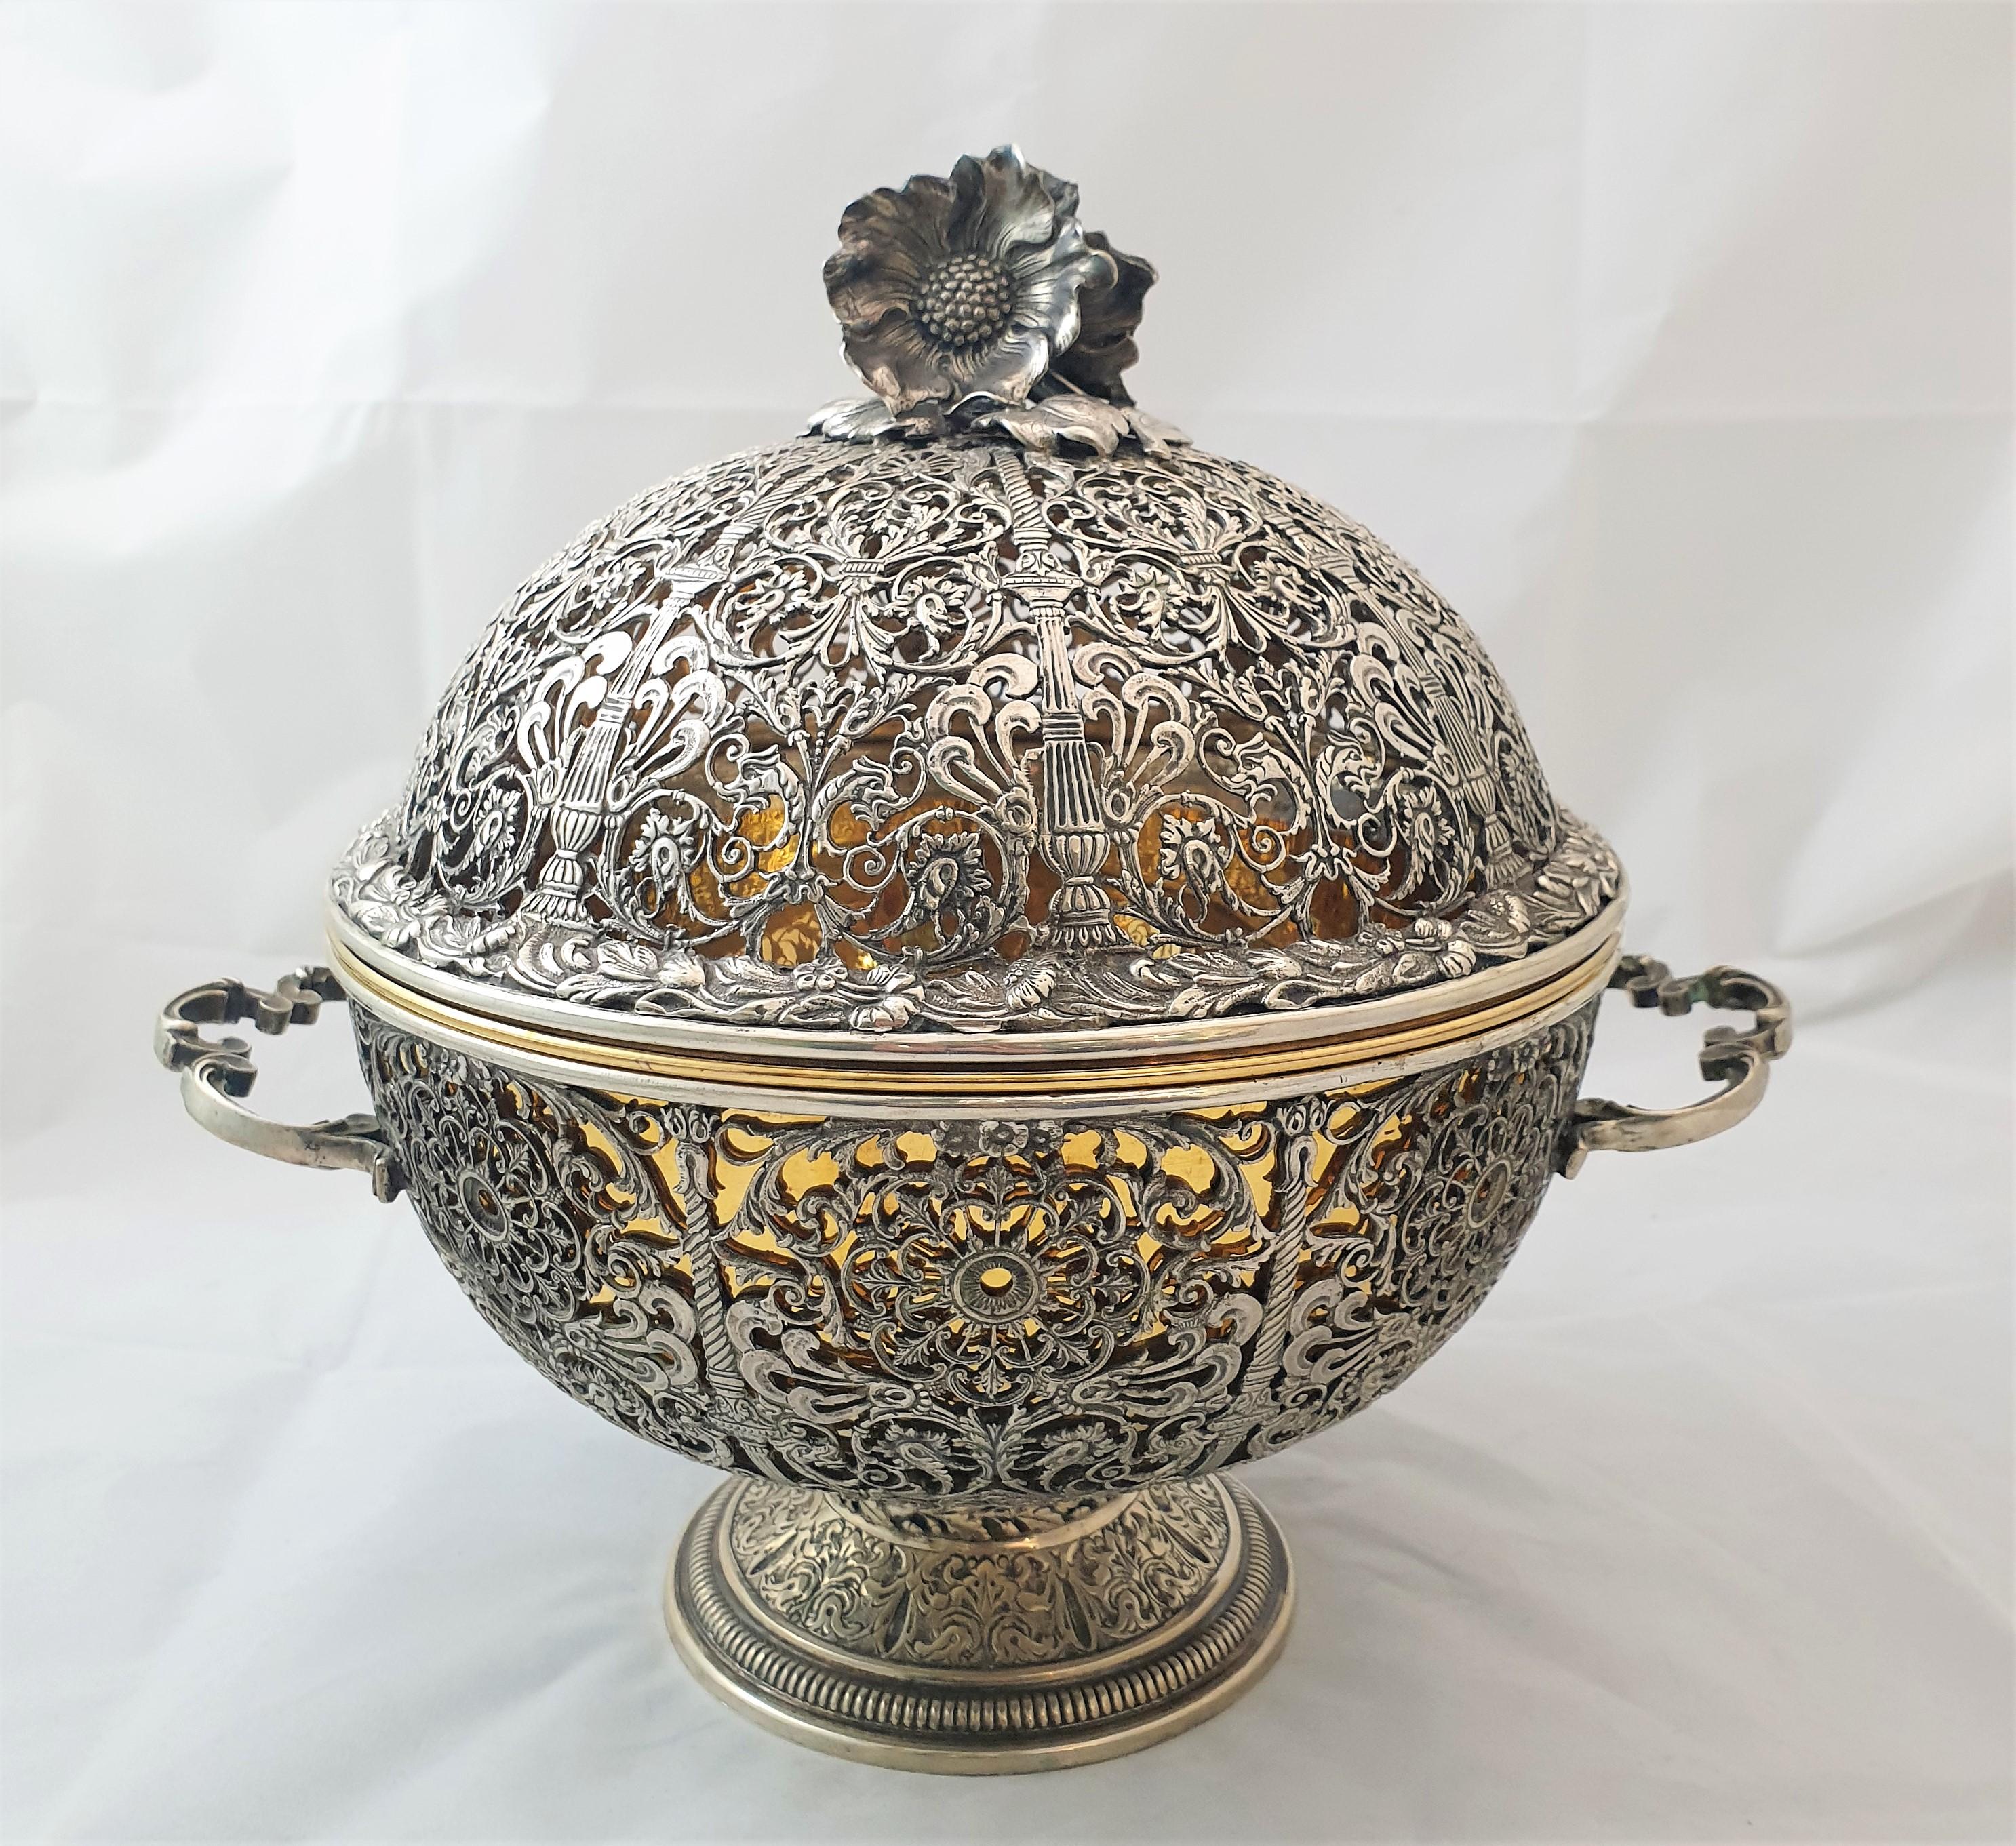 20th Century Italian Silver Fretwork Basket with Cover by Messulam Milan Italy For Sale 9